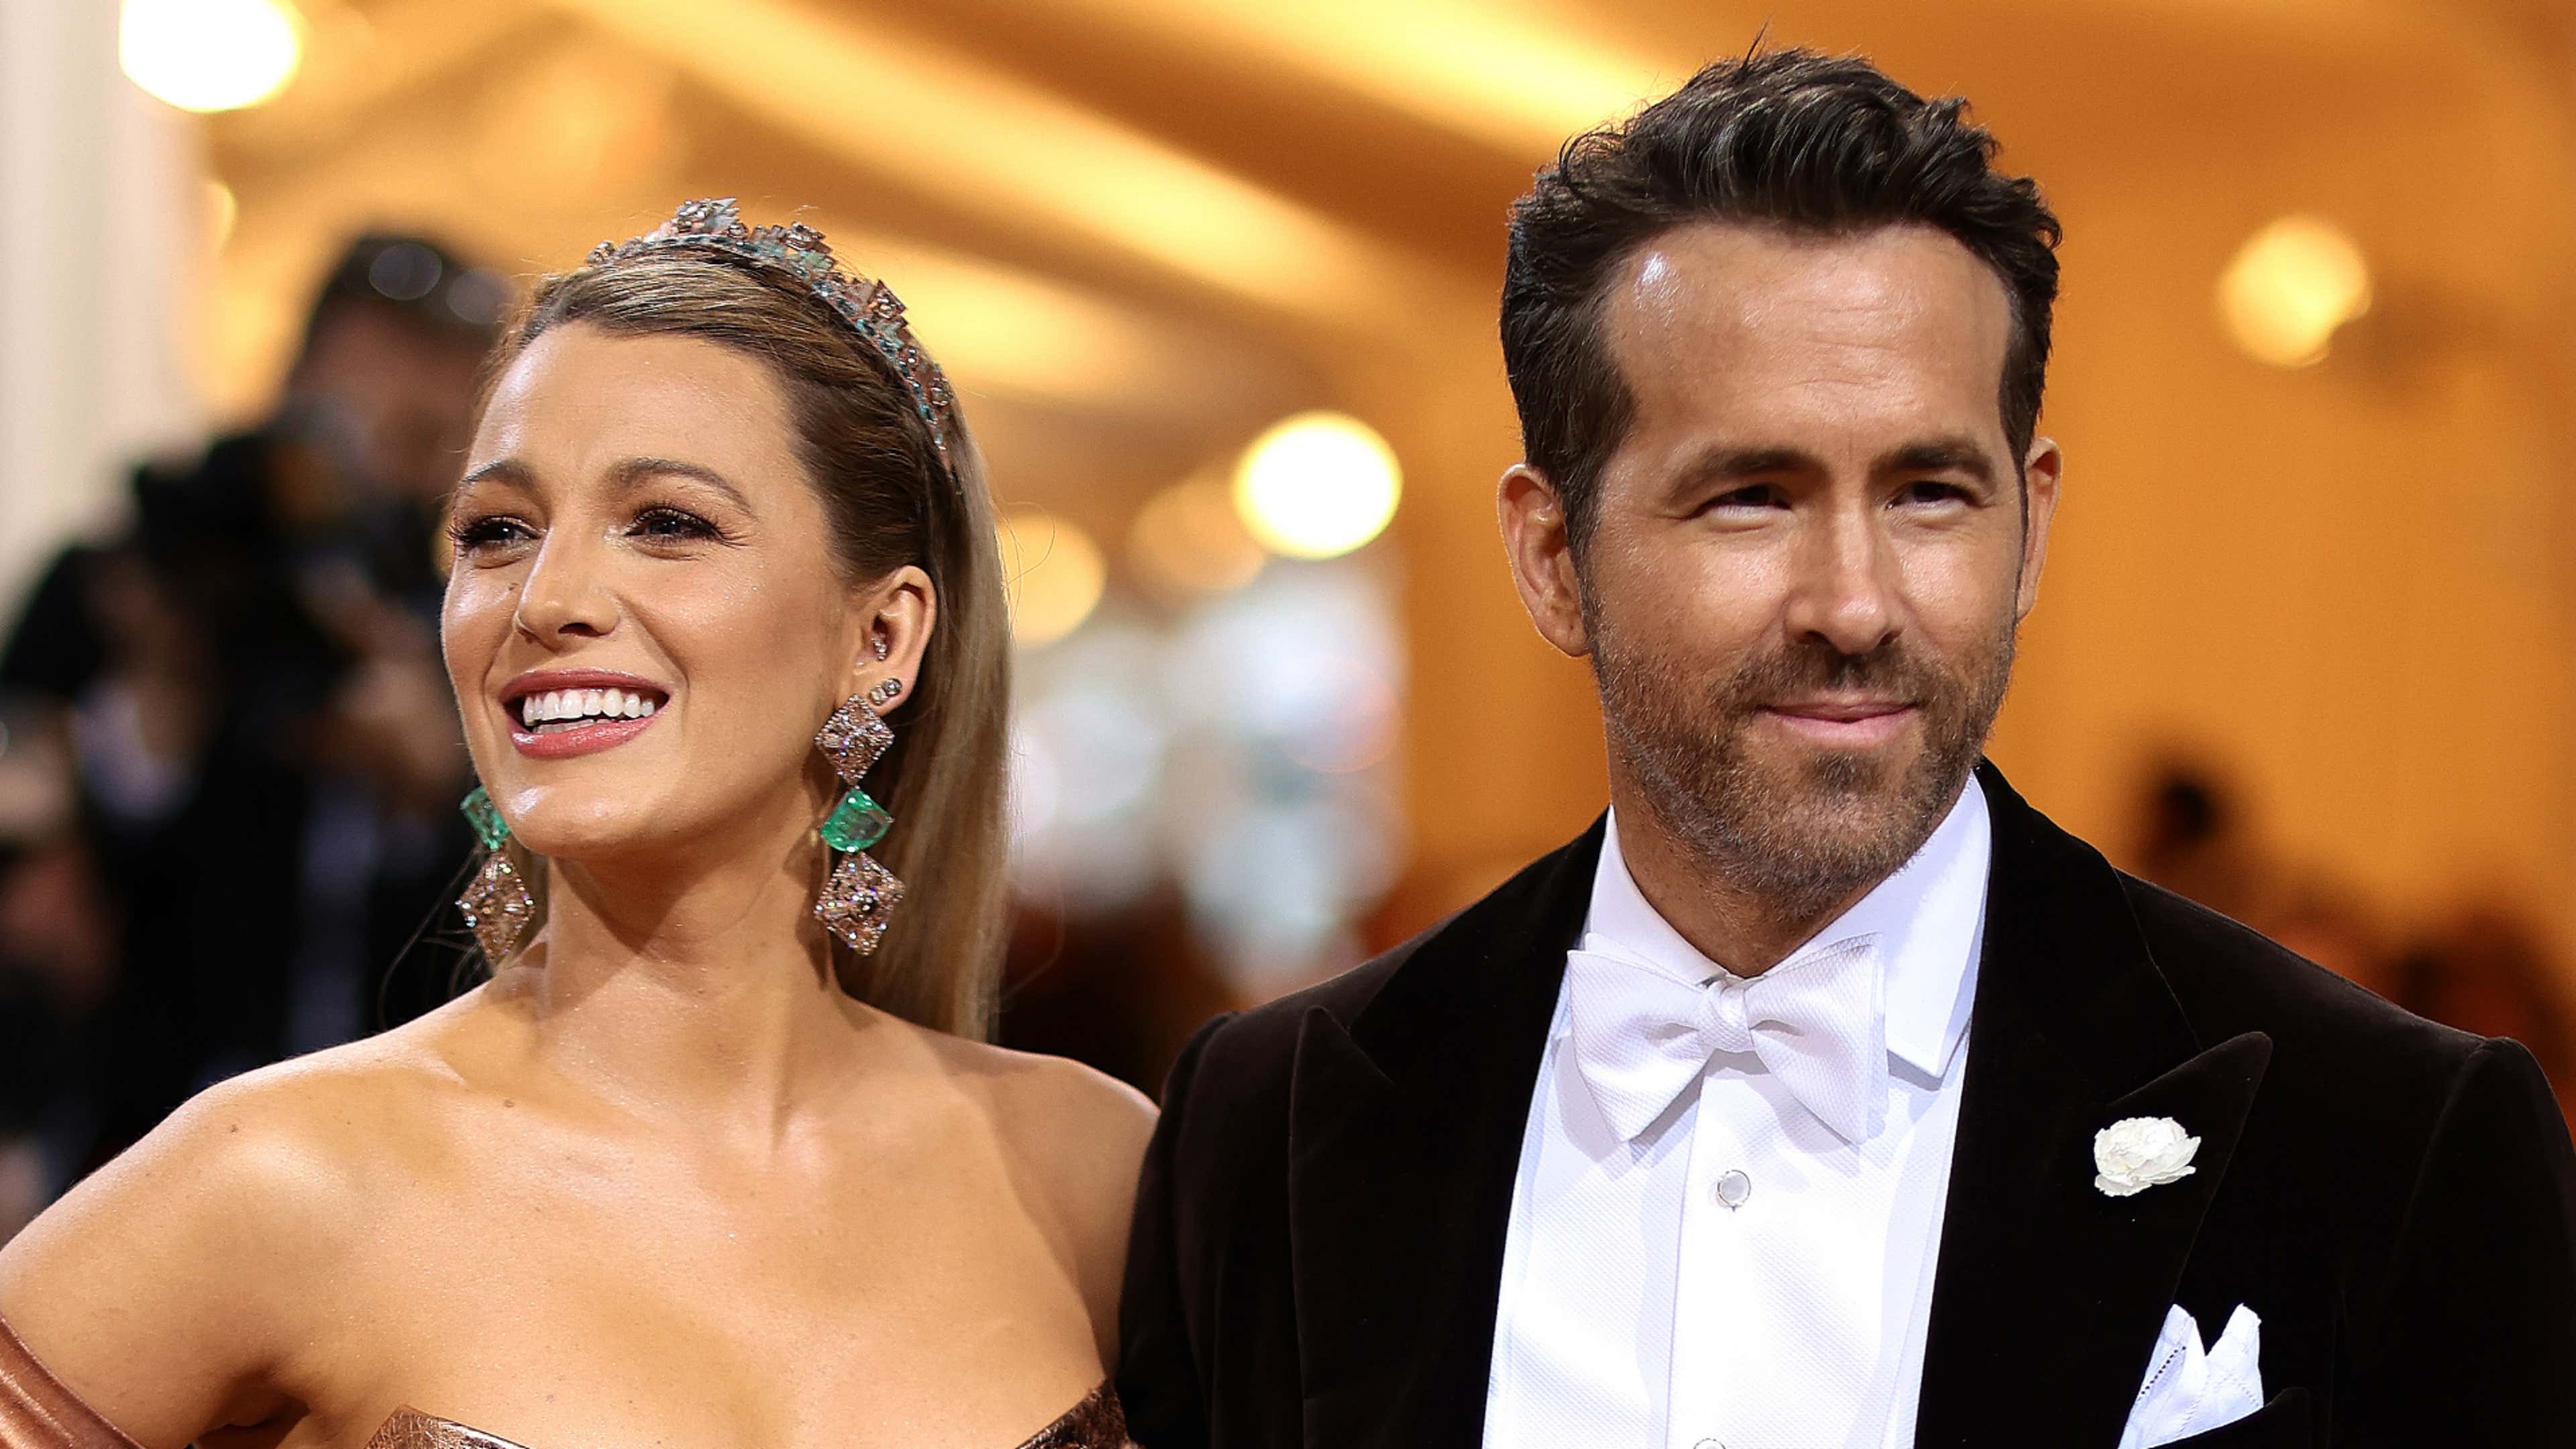 What is Ryan Reynolds' net worth & how much does the Wrexham co